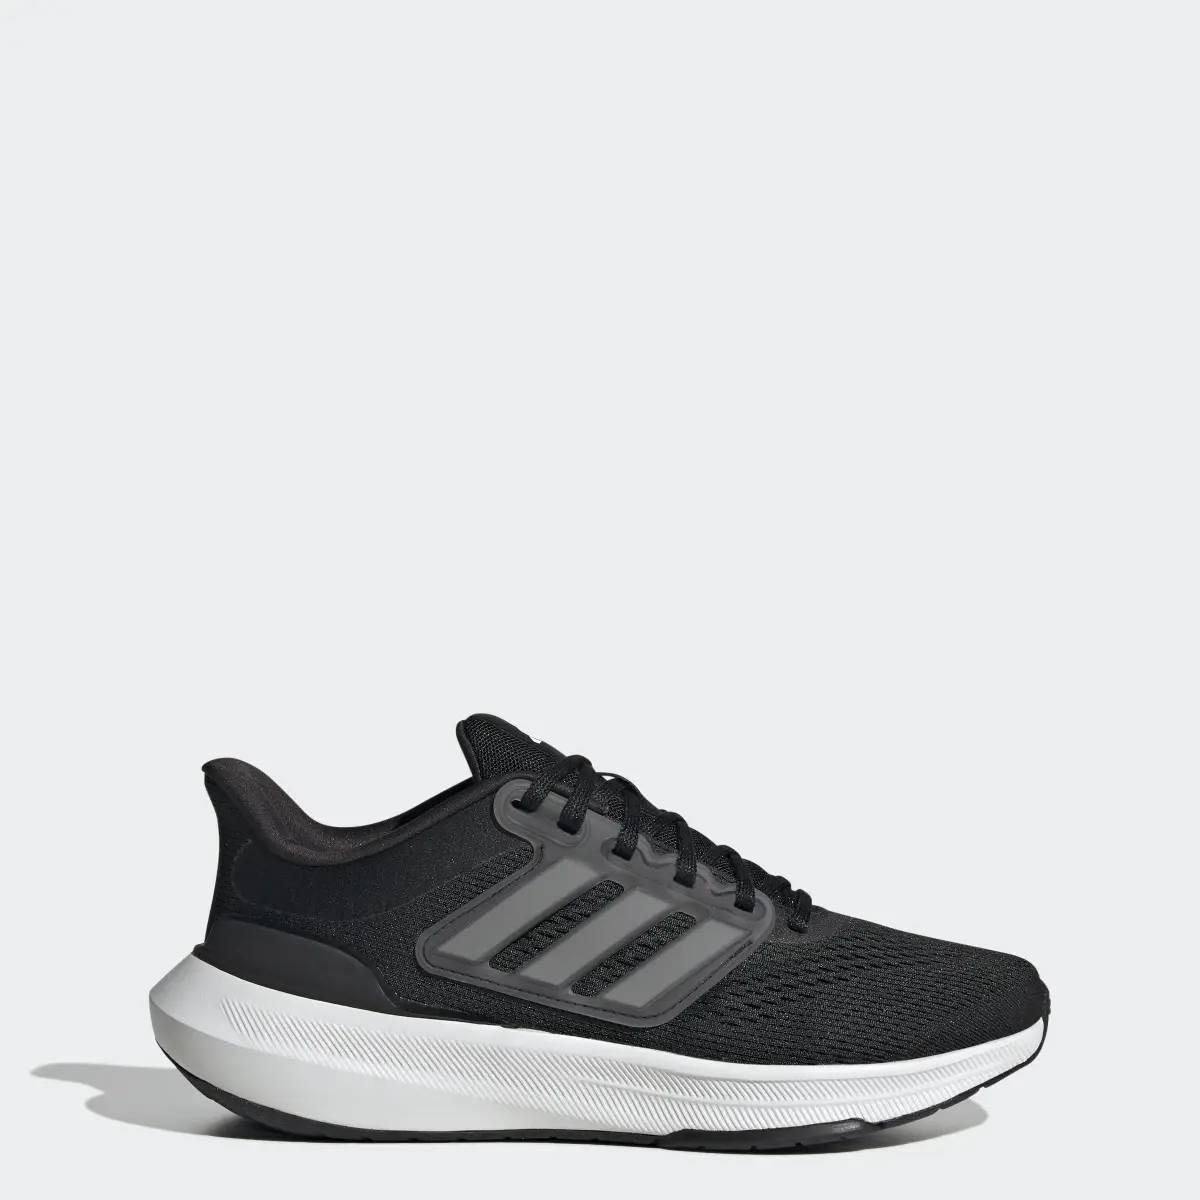 Adidas Ultrabounce Wide Running Shoes. 1